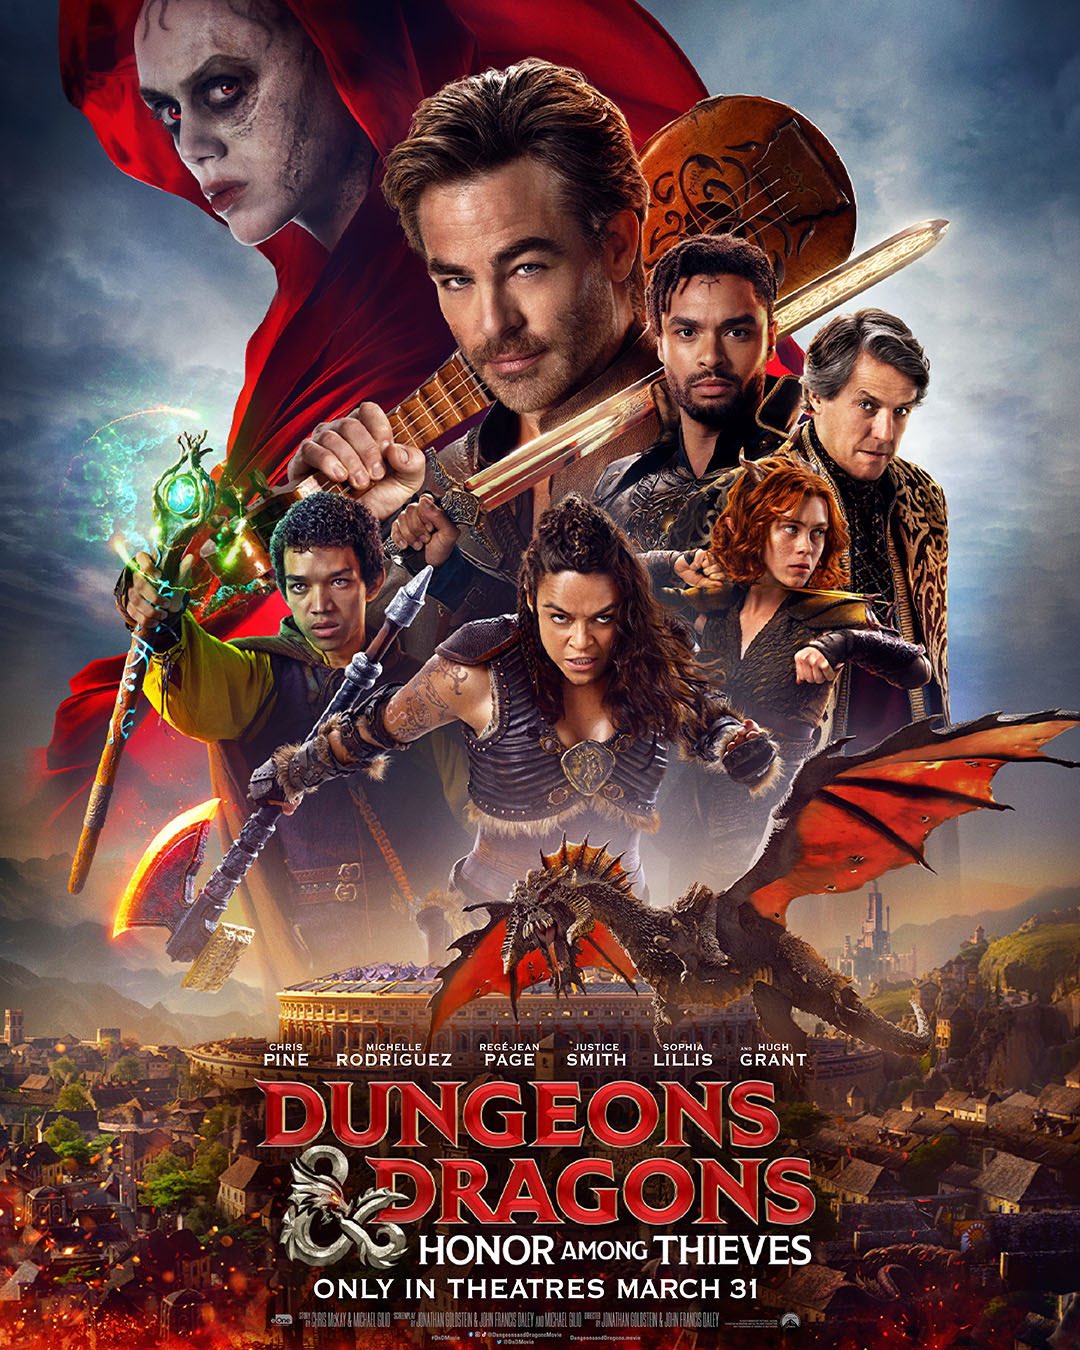 Dungeons & Dragons Movie on Twitter: "An adventure of epic proportions.  Dungeons &amp; Dragons: Honor Among Thieves arrives only in theatres March  31, 2023. #DnDMovie https://t.co/C5gLQF6nva" / Twitter